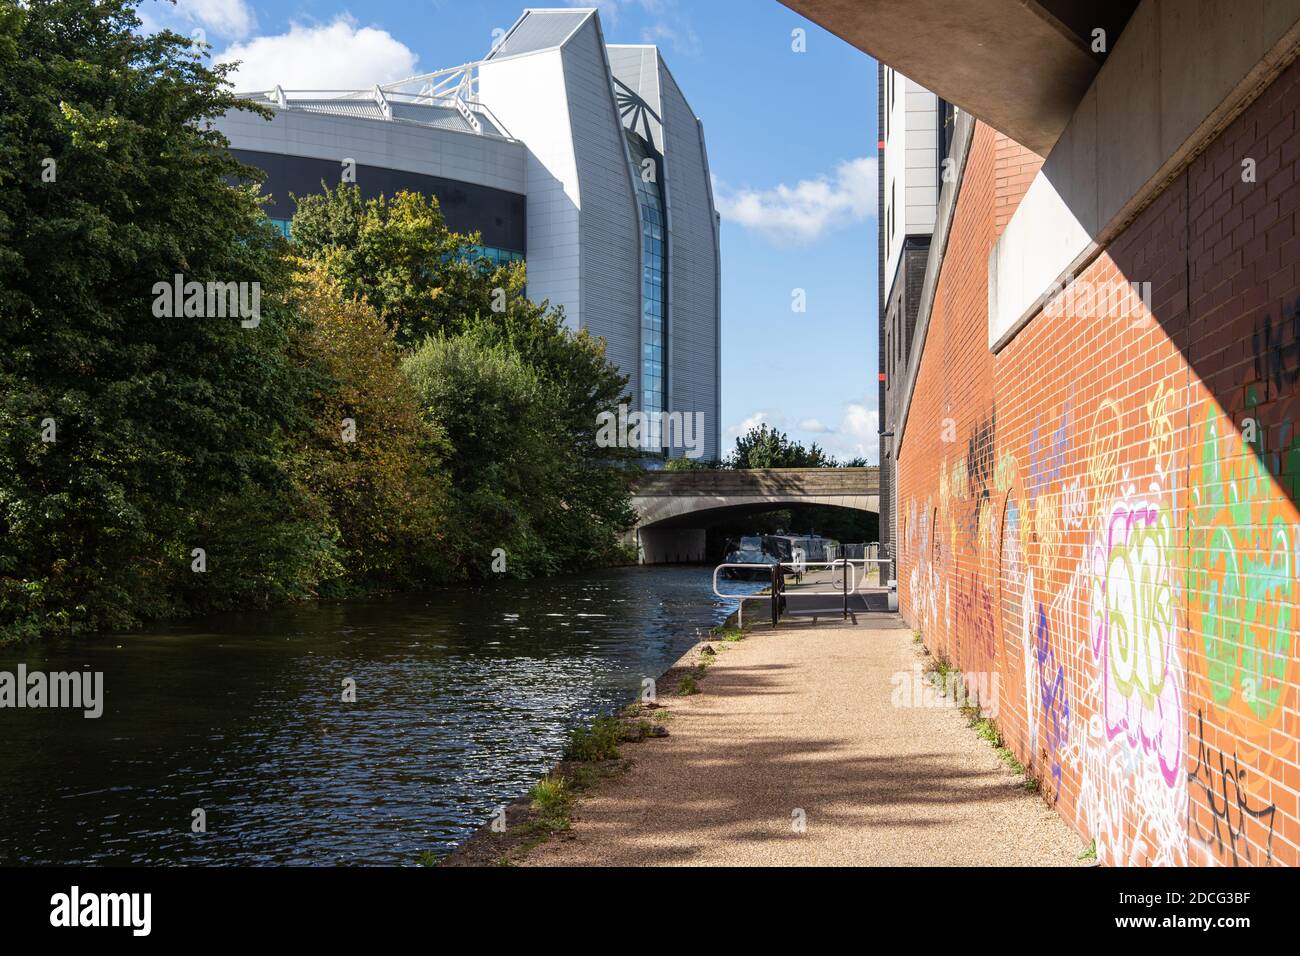 stade de football old trafford depuis le canal bridgewater, manchester Banque D'Images